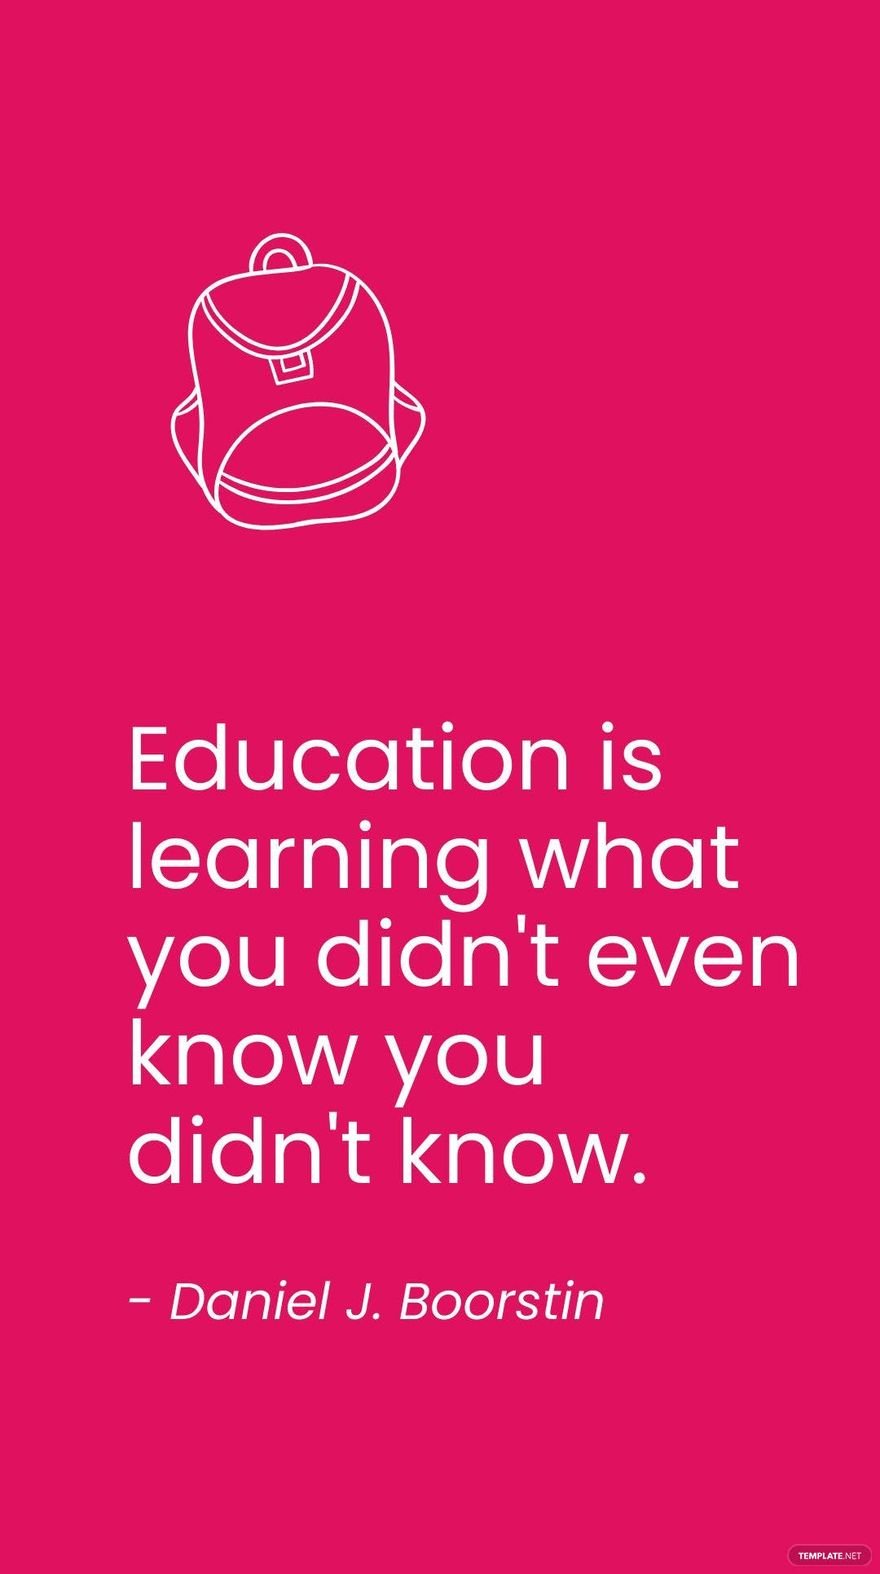 Free Daniel J. Boorstin - Education is learning what you didn't even know you didn't know. in JPG